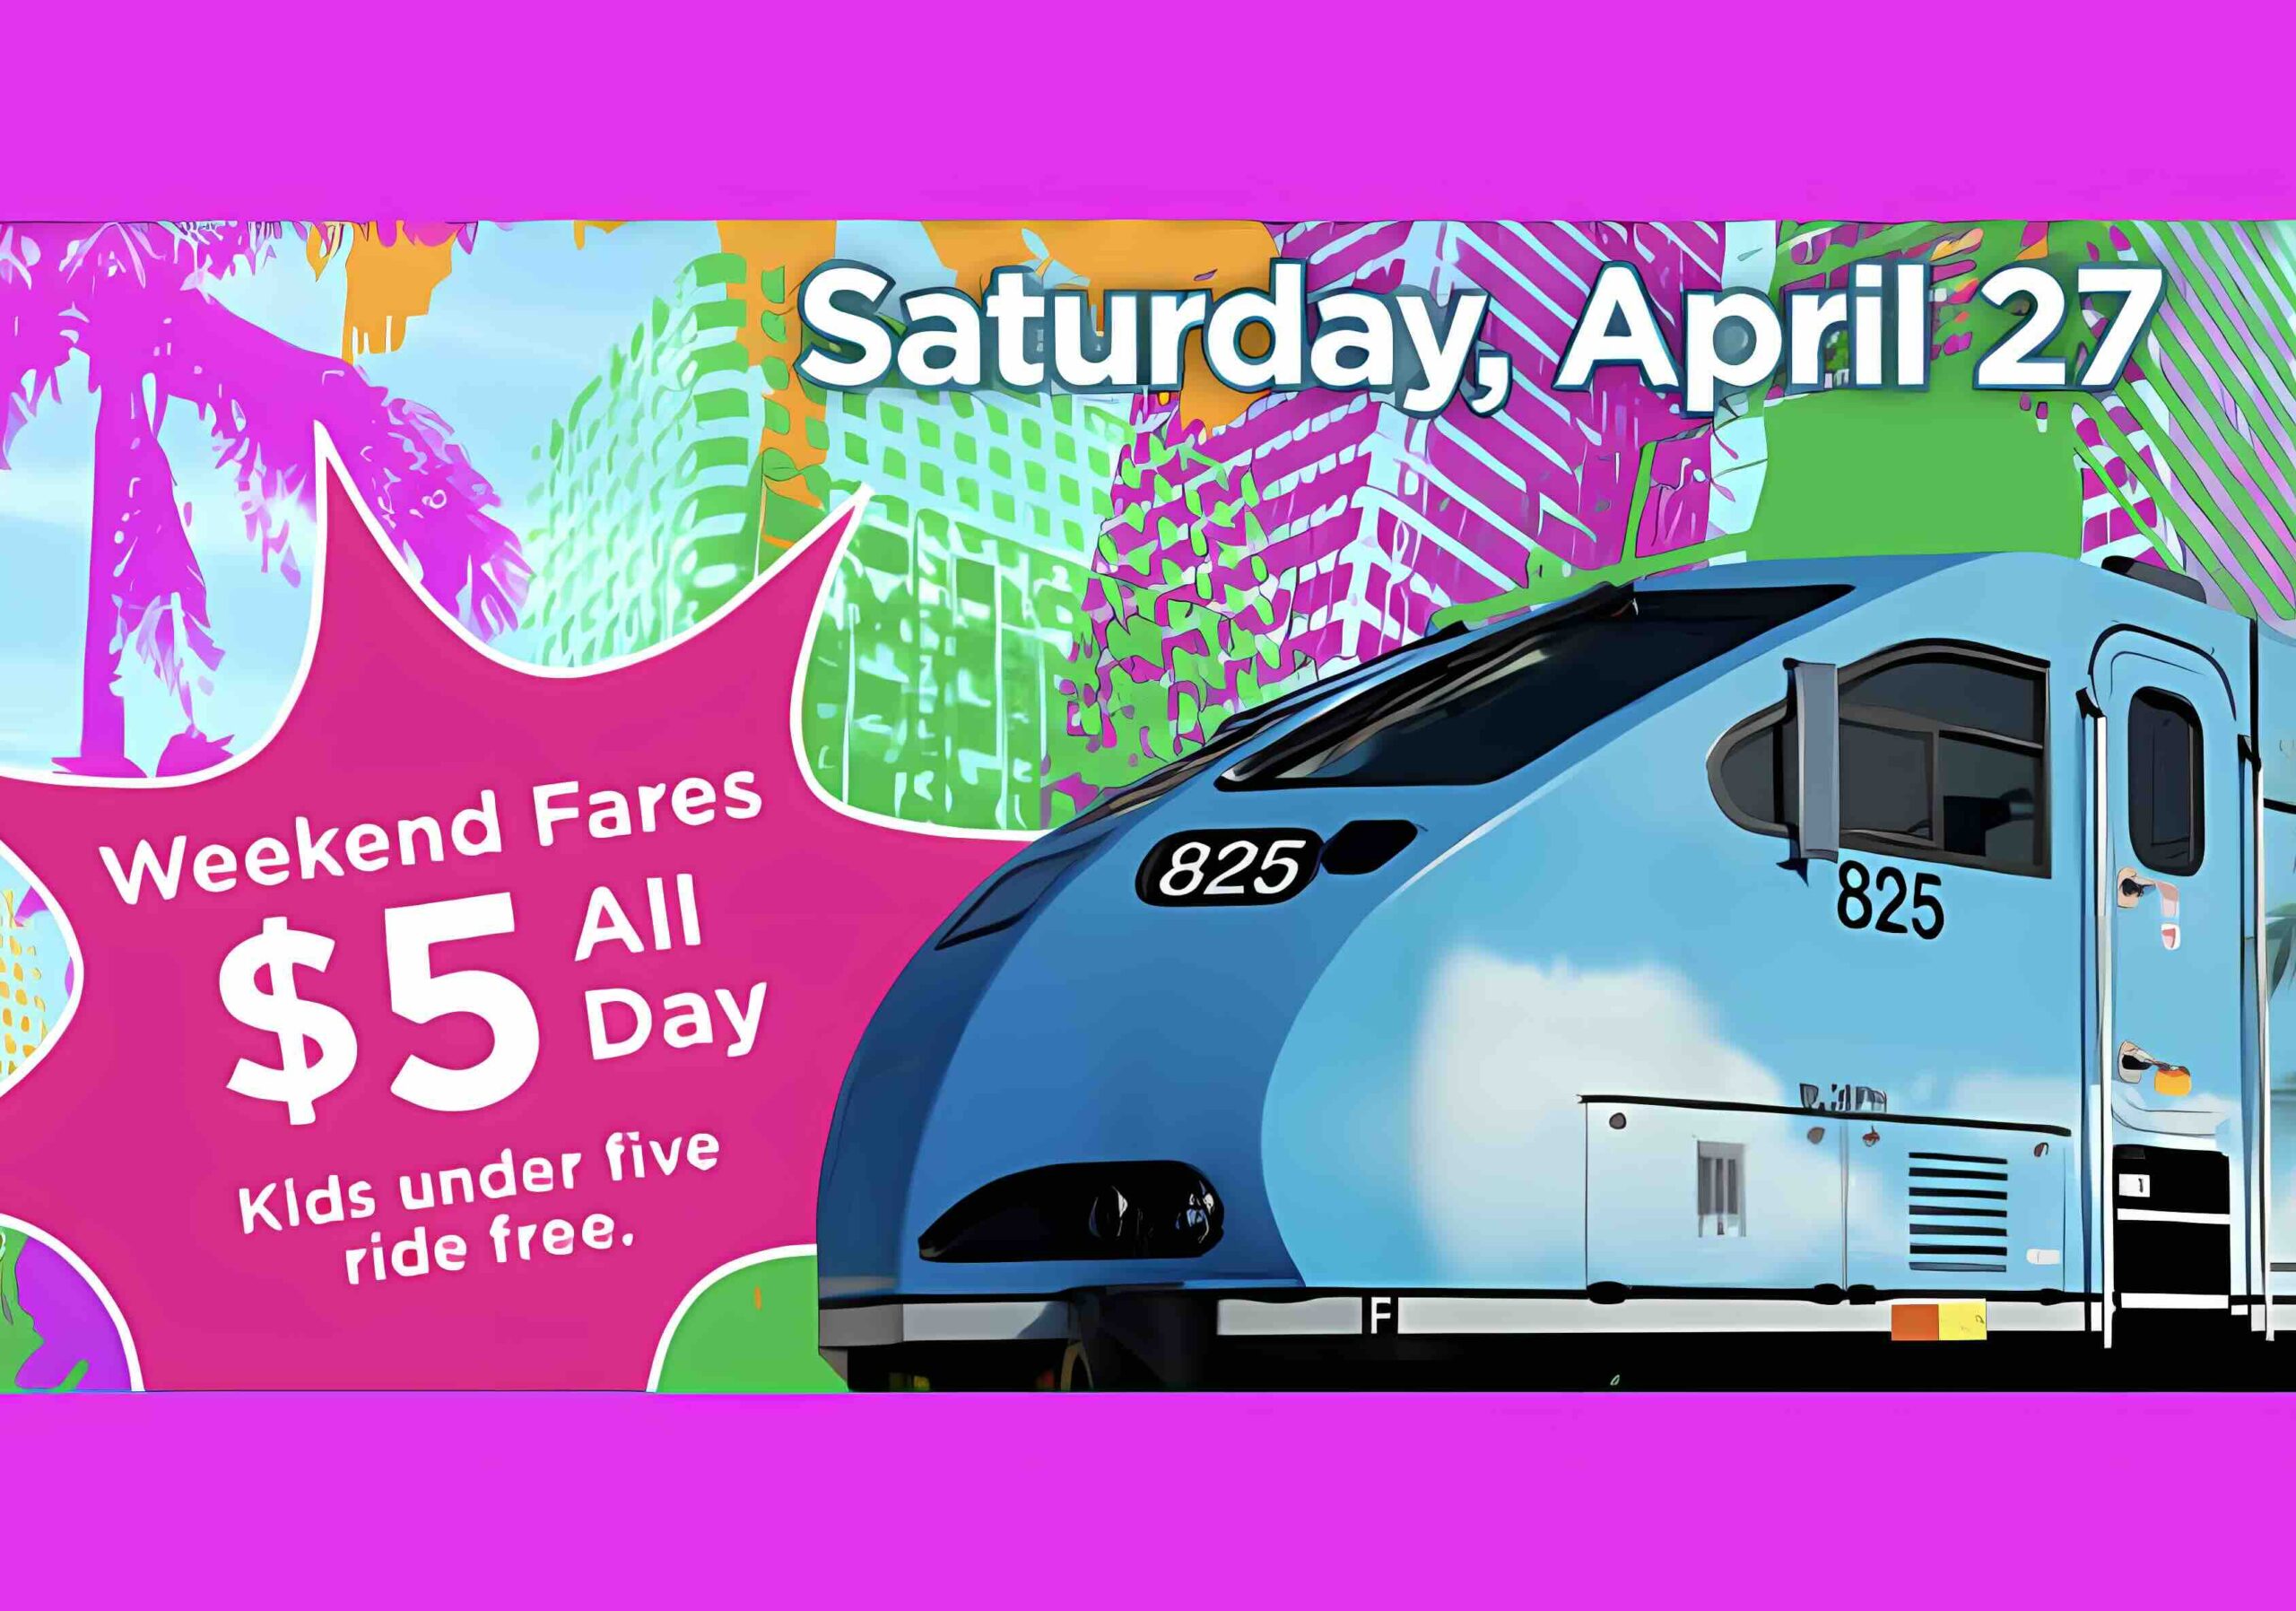 Ride & Play Tri-Rail for $5 all day